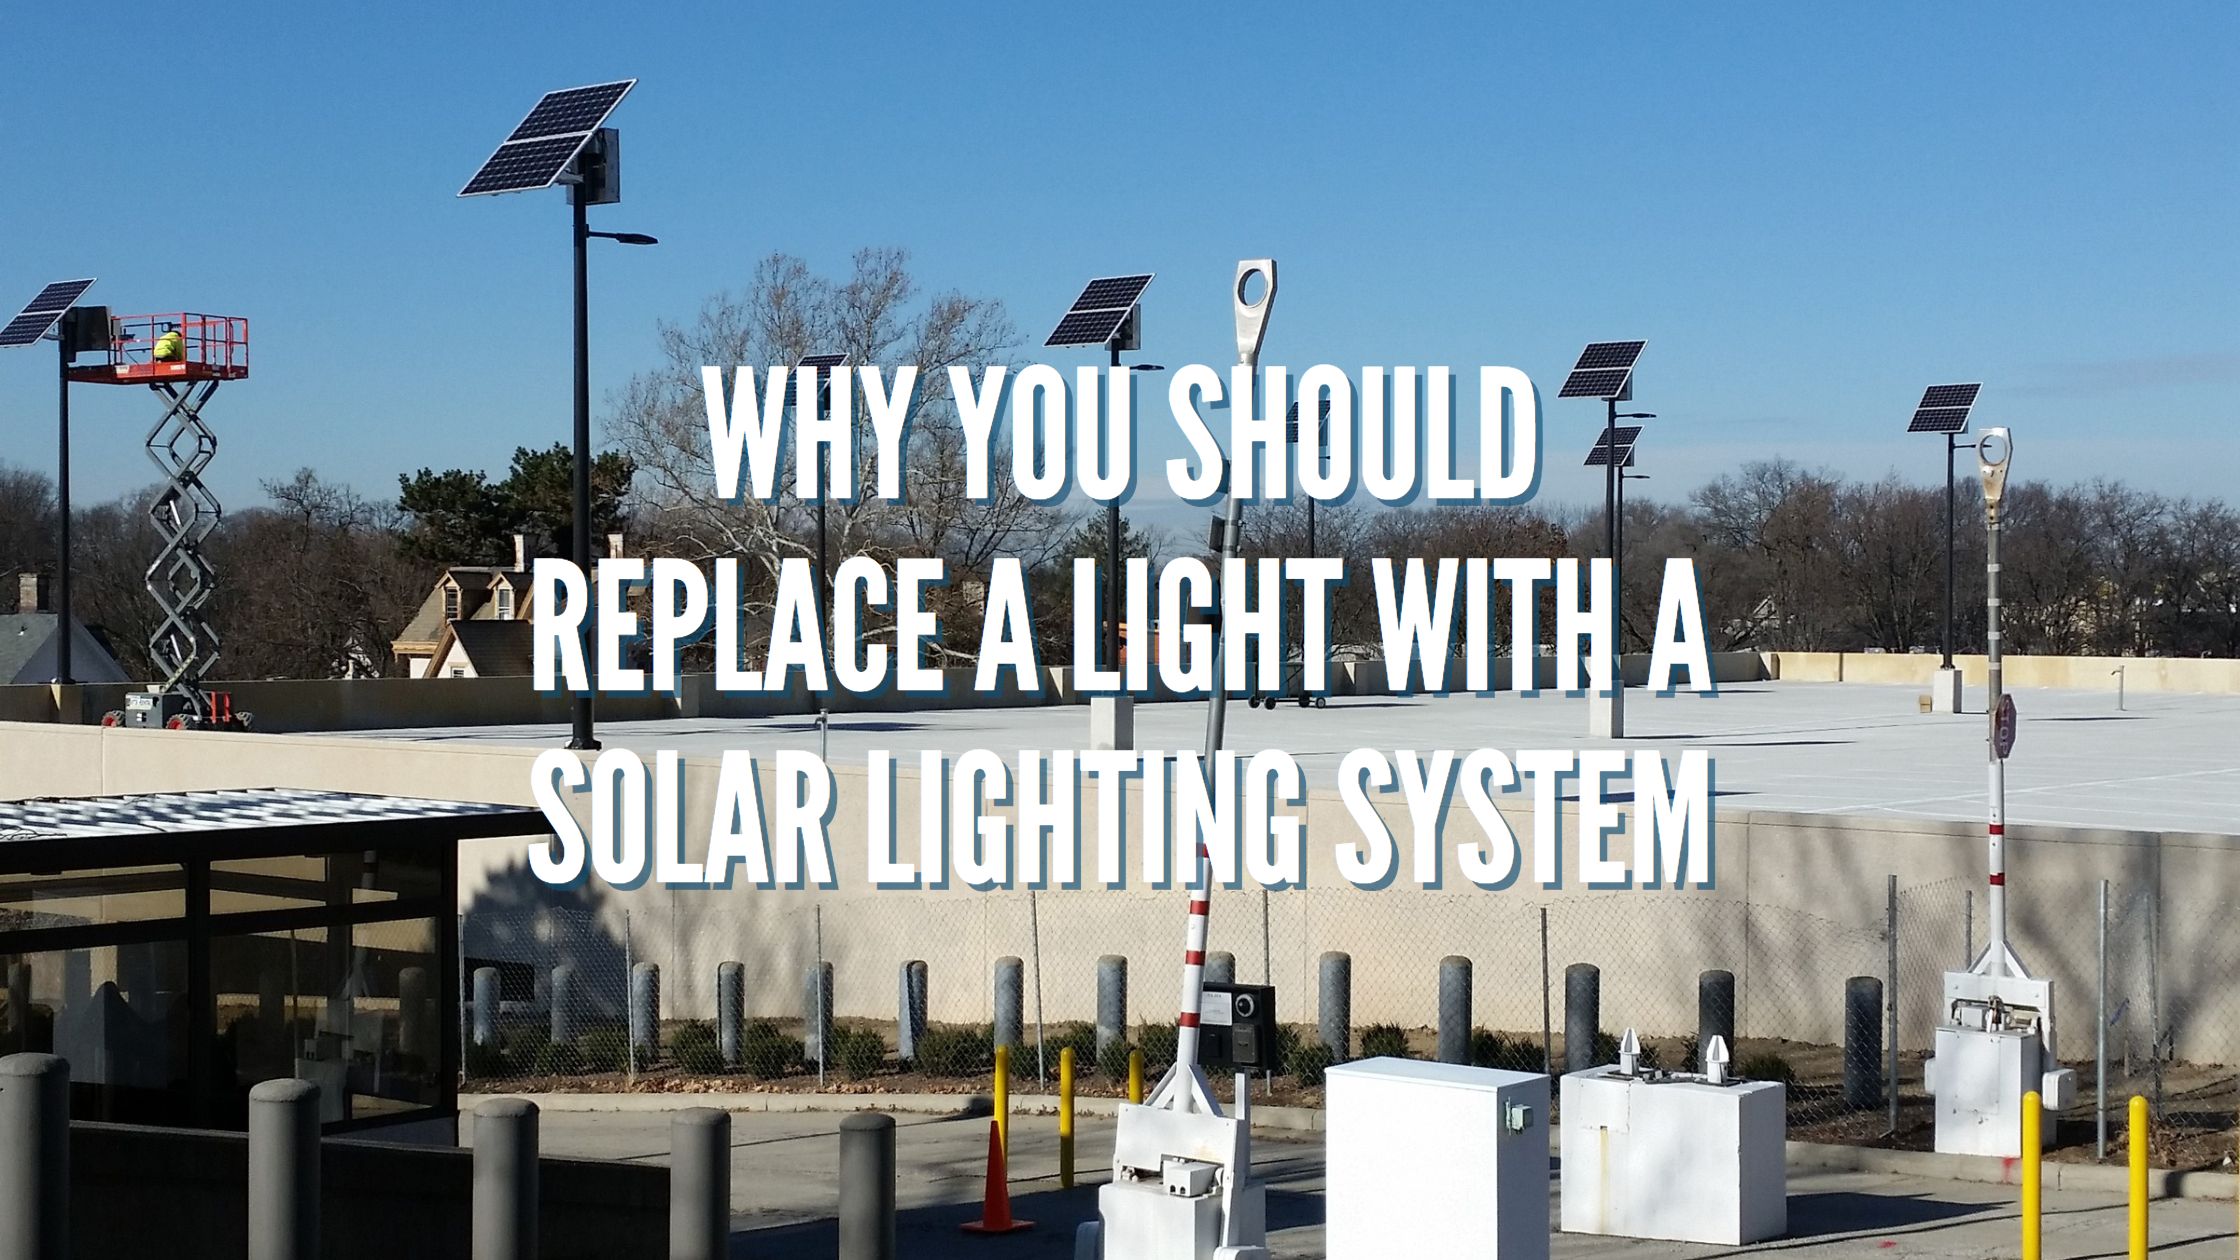 Why You Should Replace a Light with a Solar Lighting System